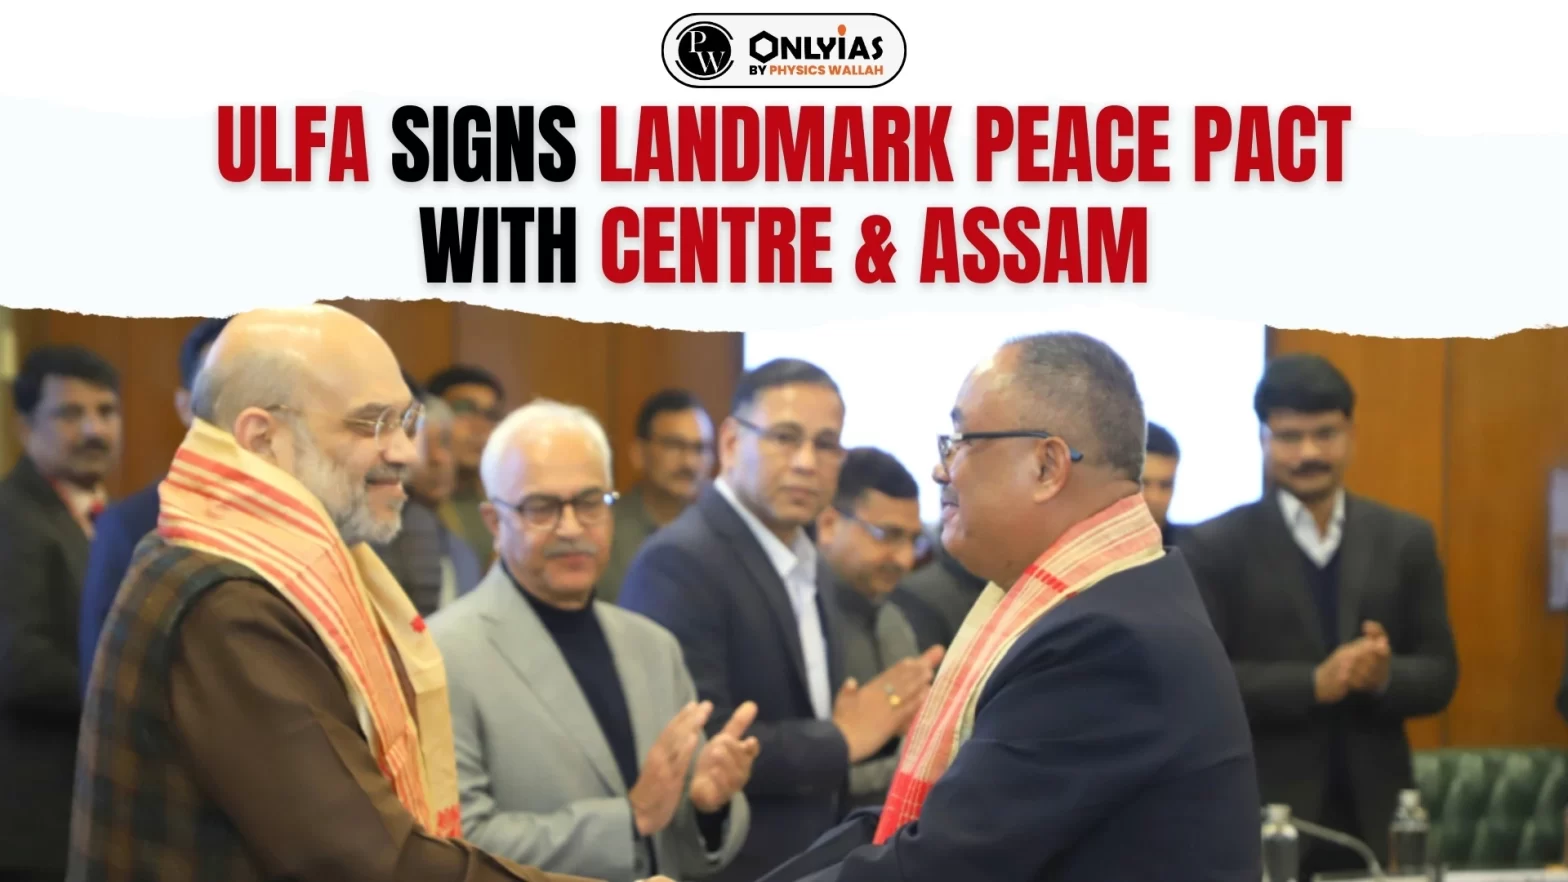 ULFA Signs Landmark Peace Pact with Centre & Assam